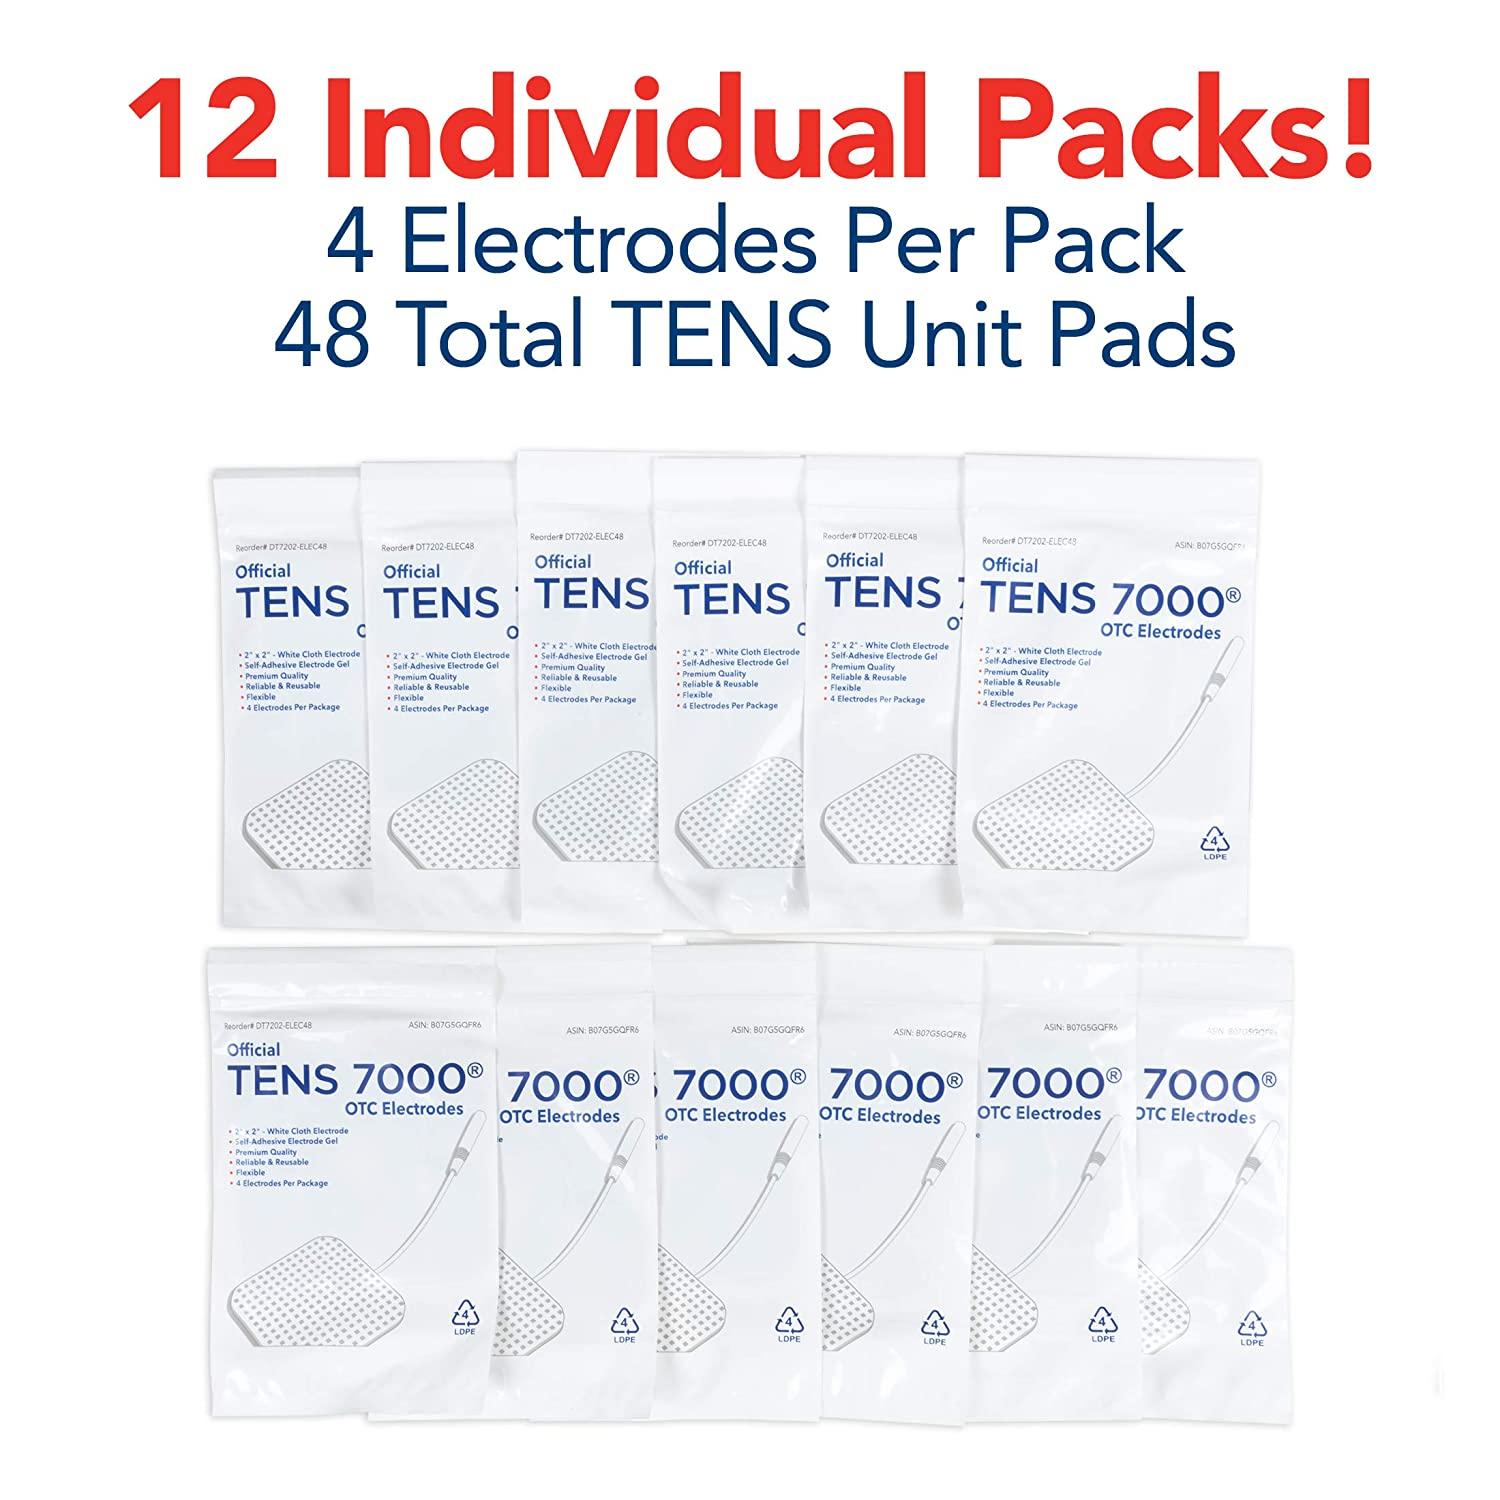 TENS 7000 Official Unit Replacement Pads - 48 Pack, 2 x 2, White